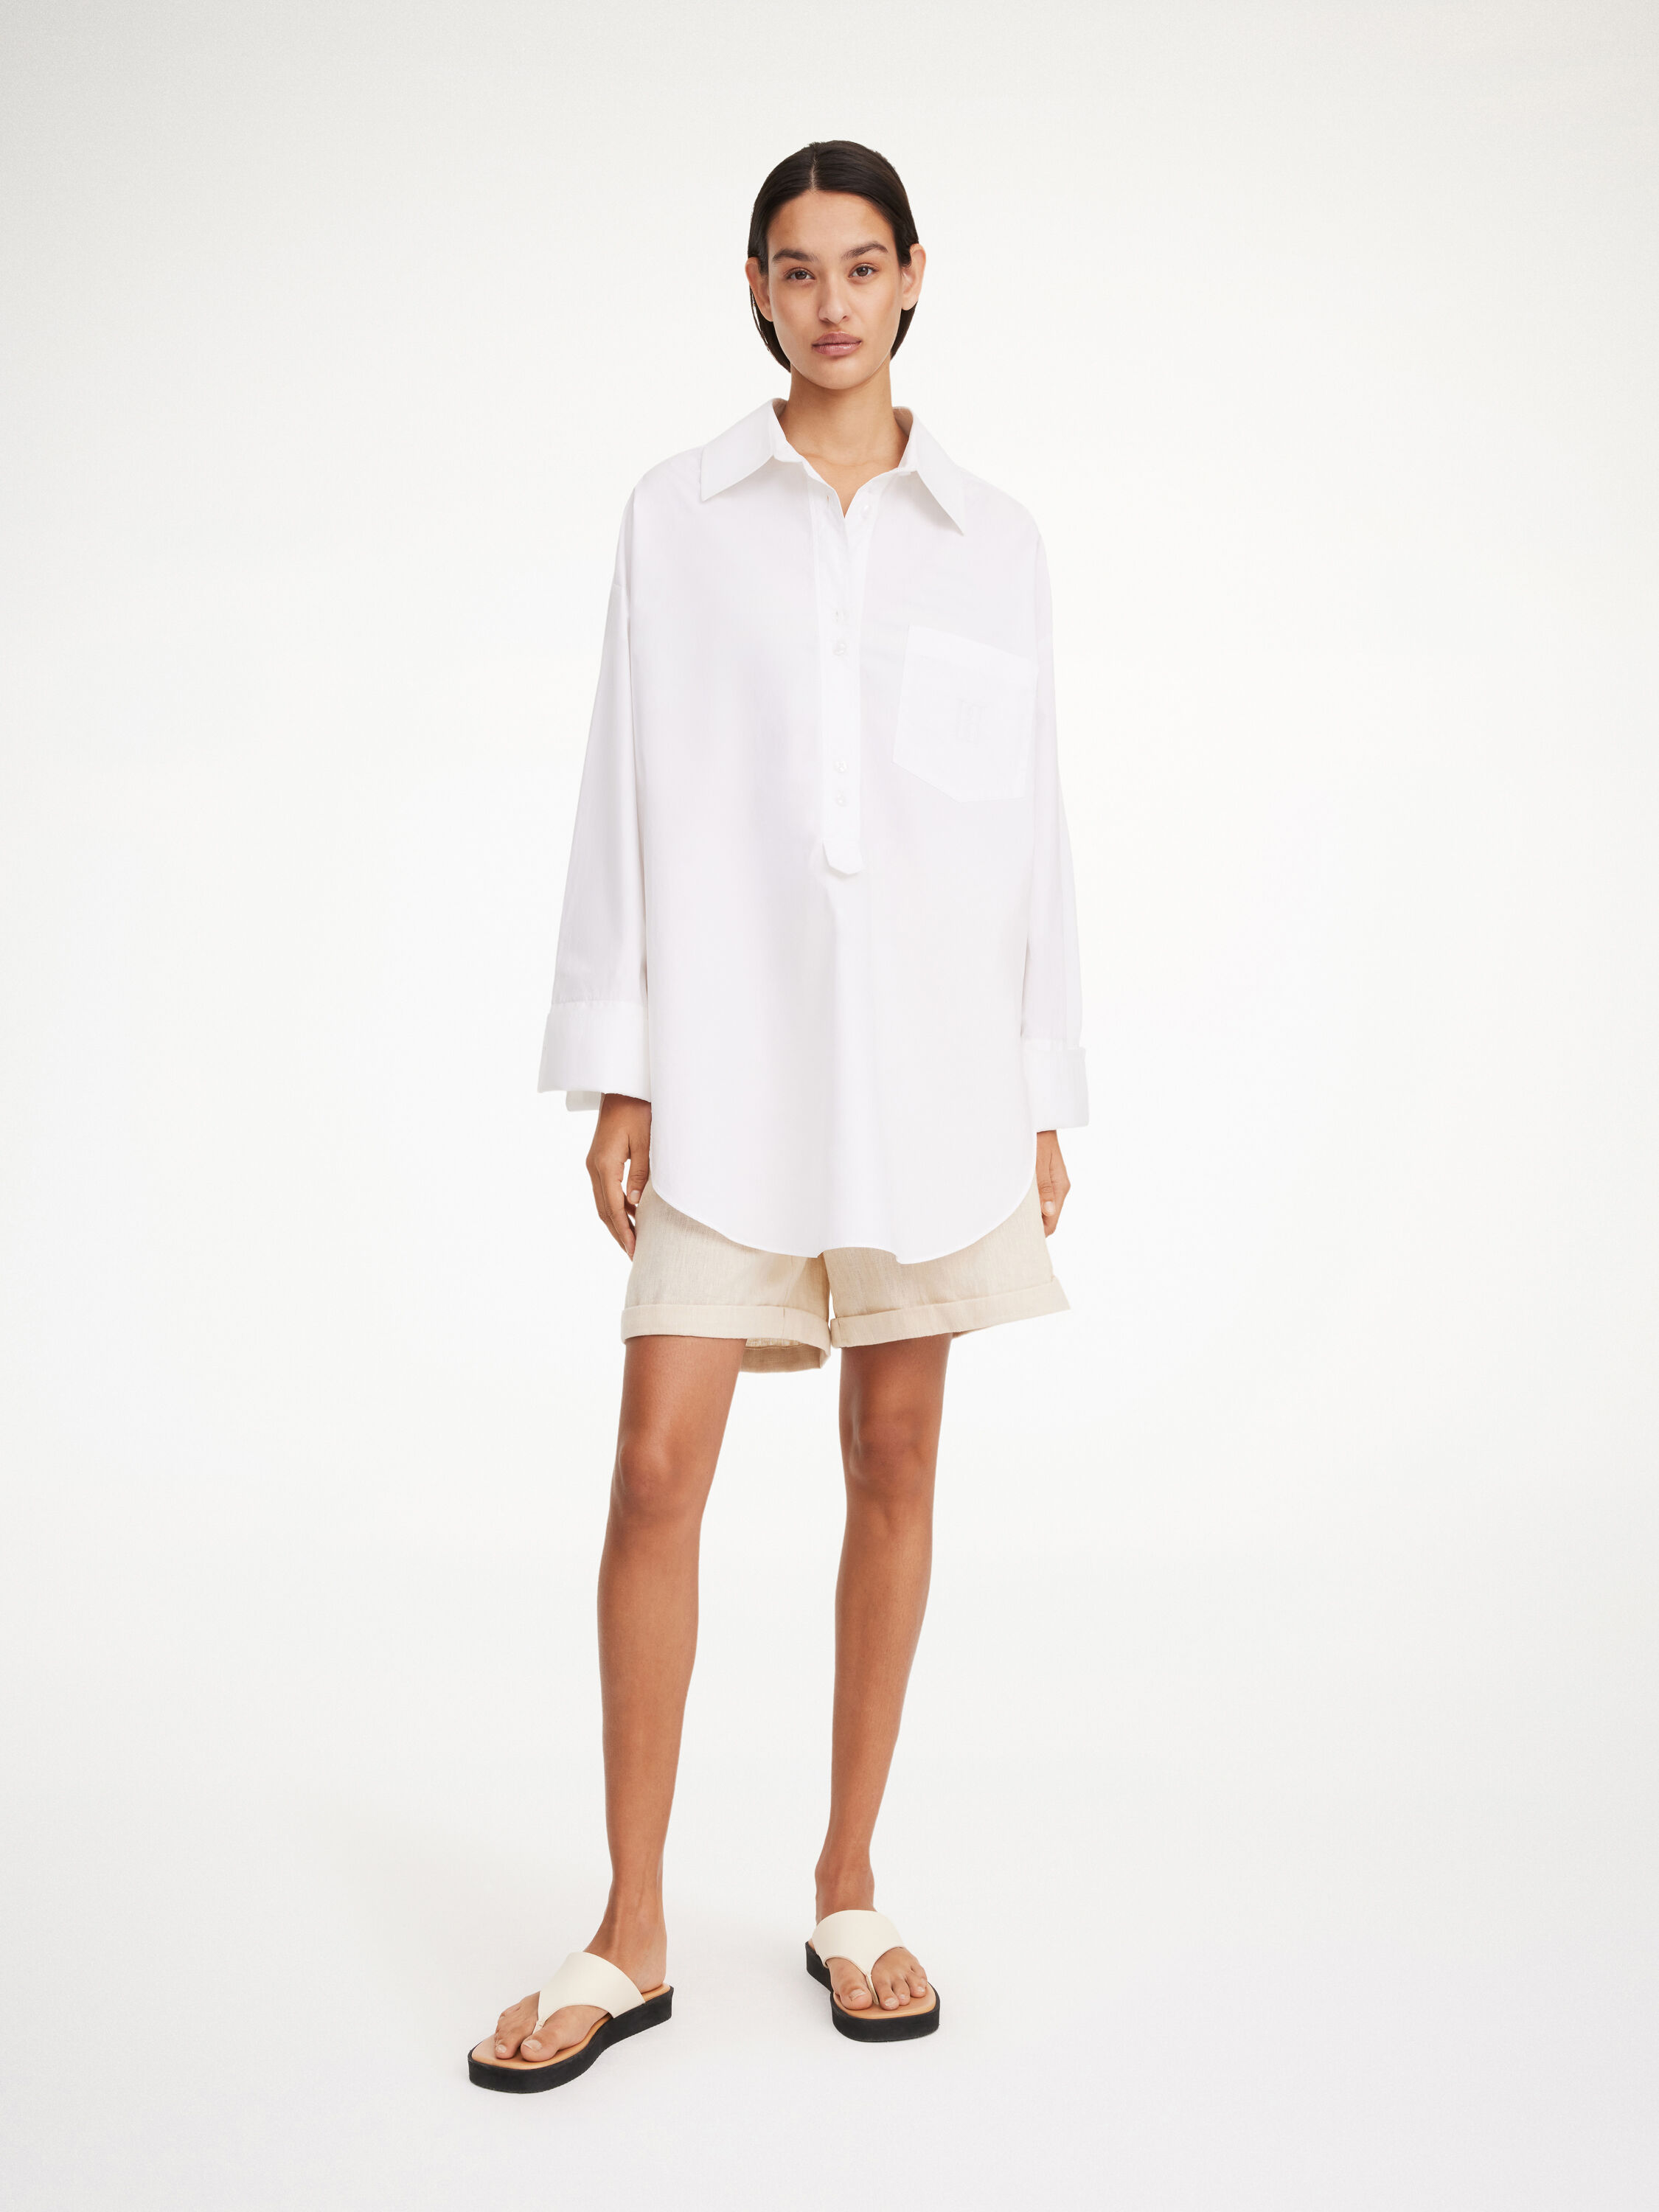 Shirts & blouses | Explore all styles here | By Malene Birger